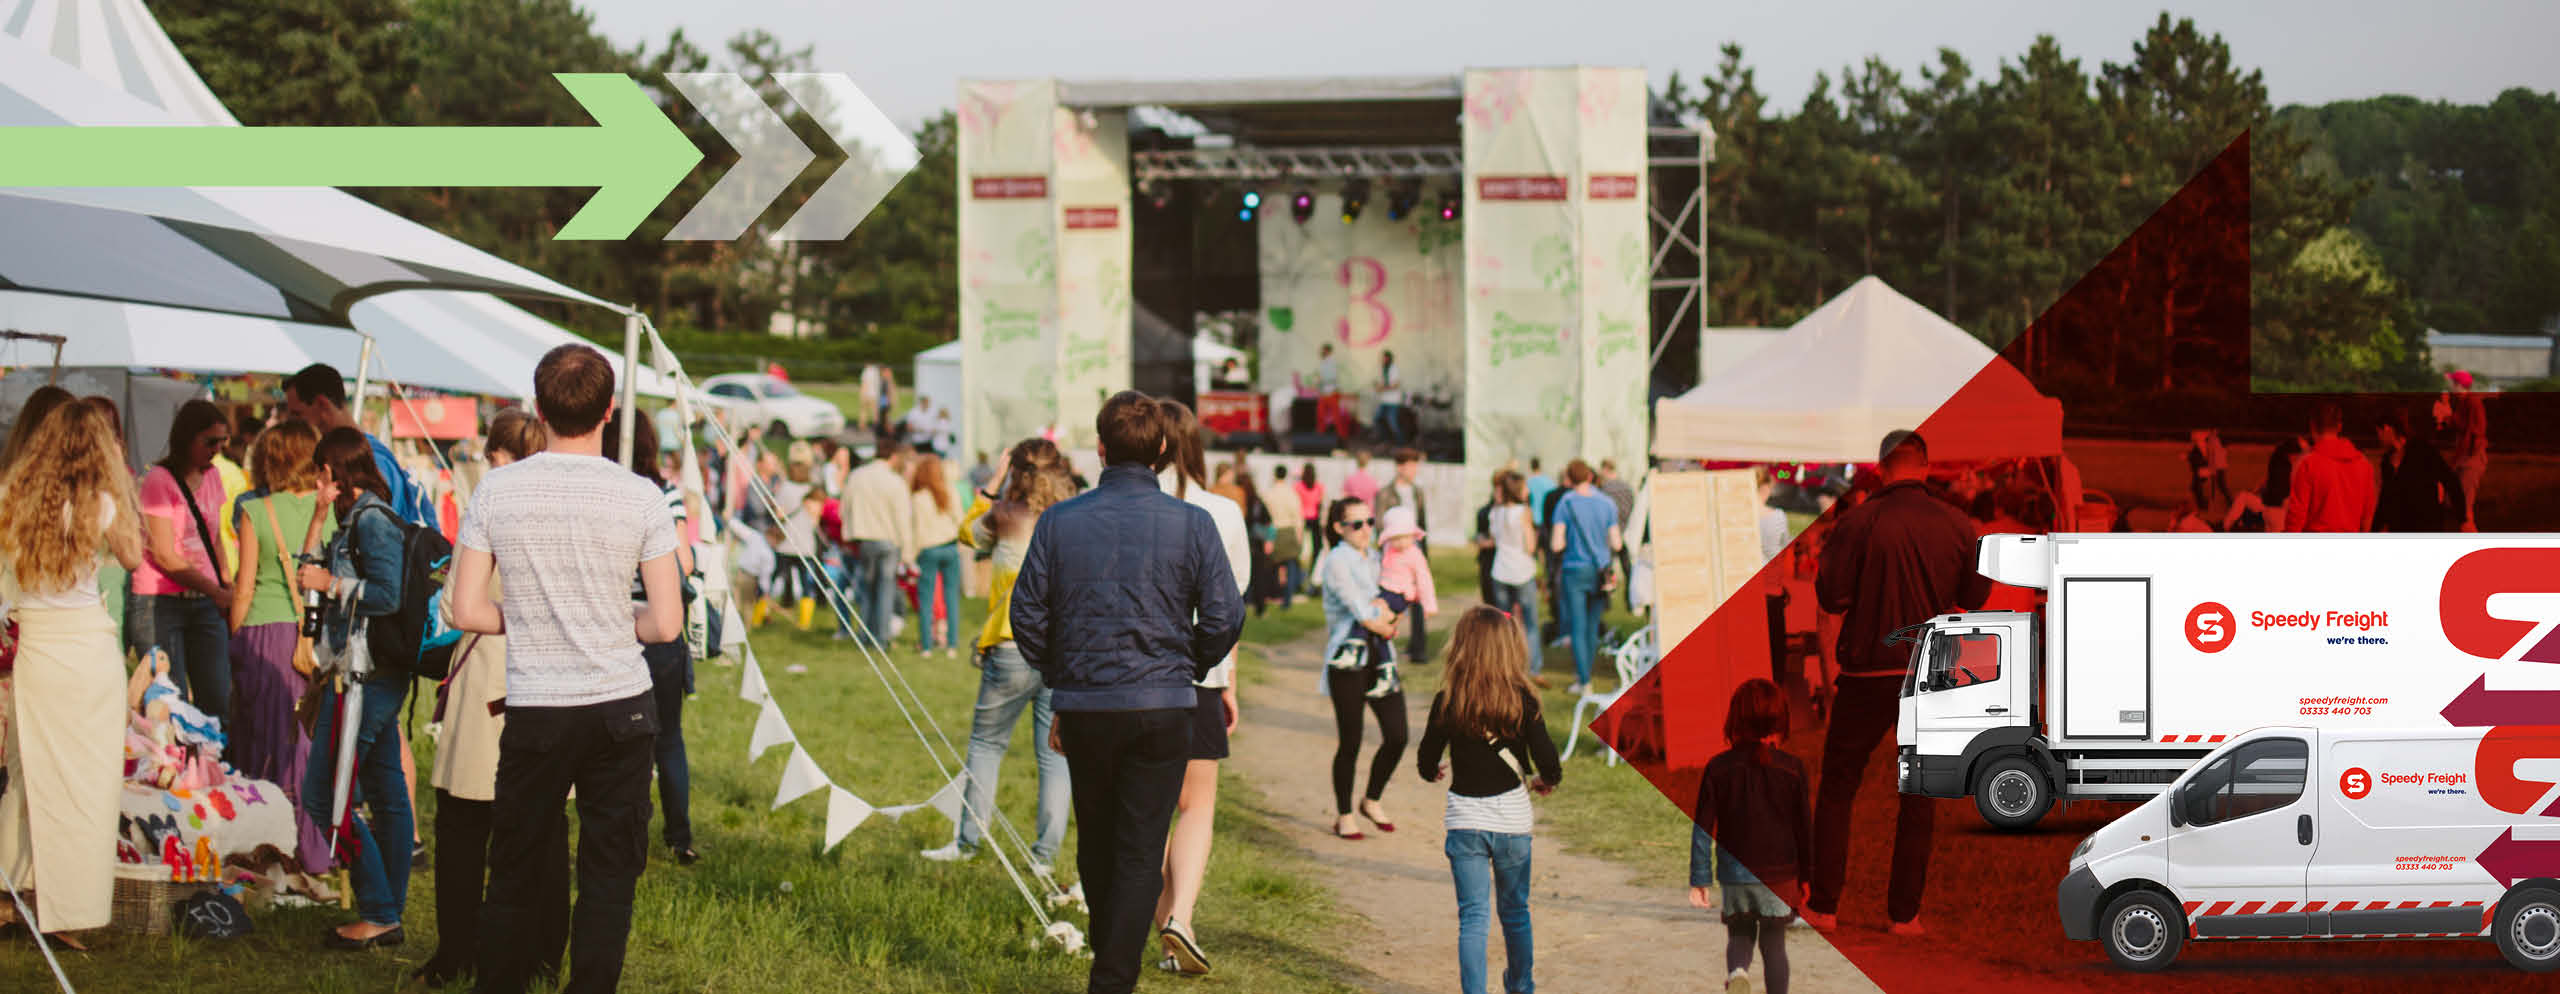 How To Find an Event & Festival Logistics Provider for the Summer